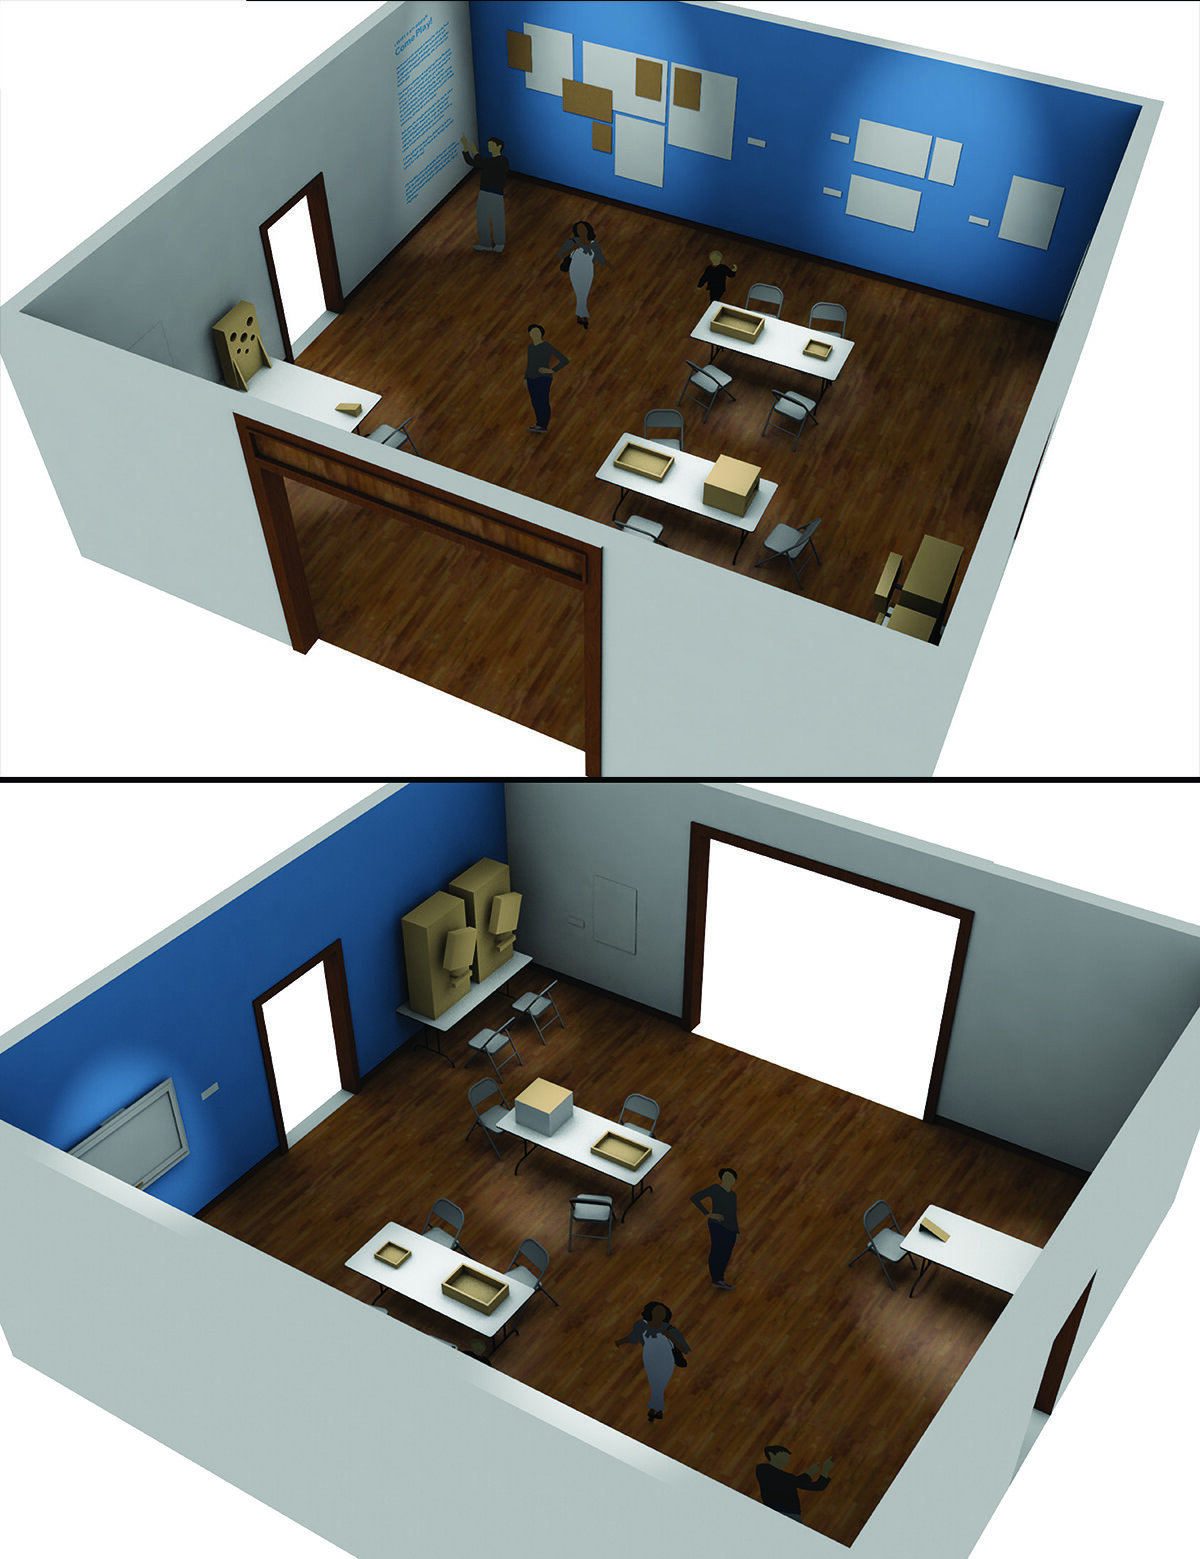  3D renders and exhibit design plans for  Come Play!.   